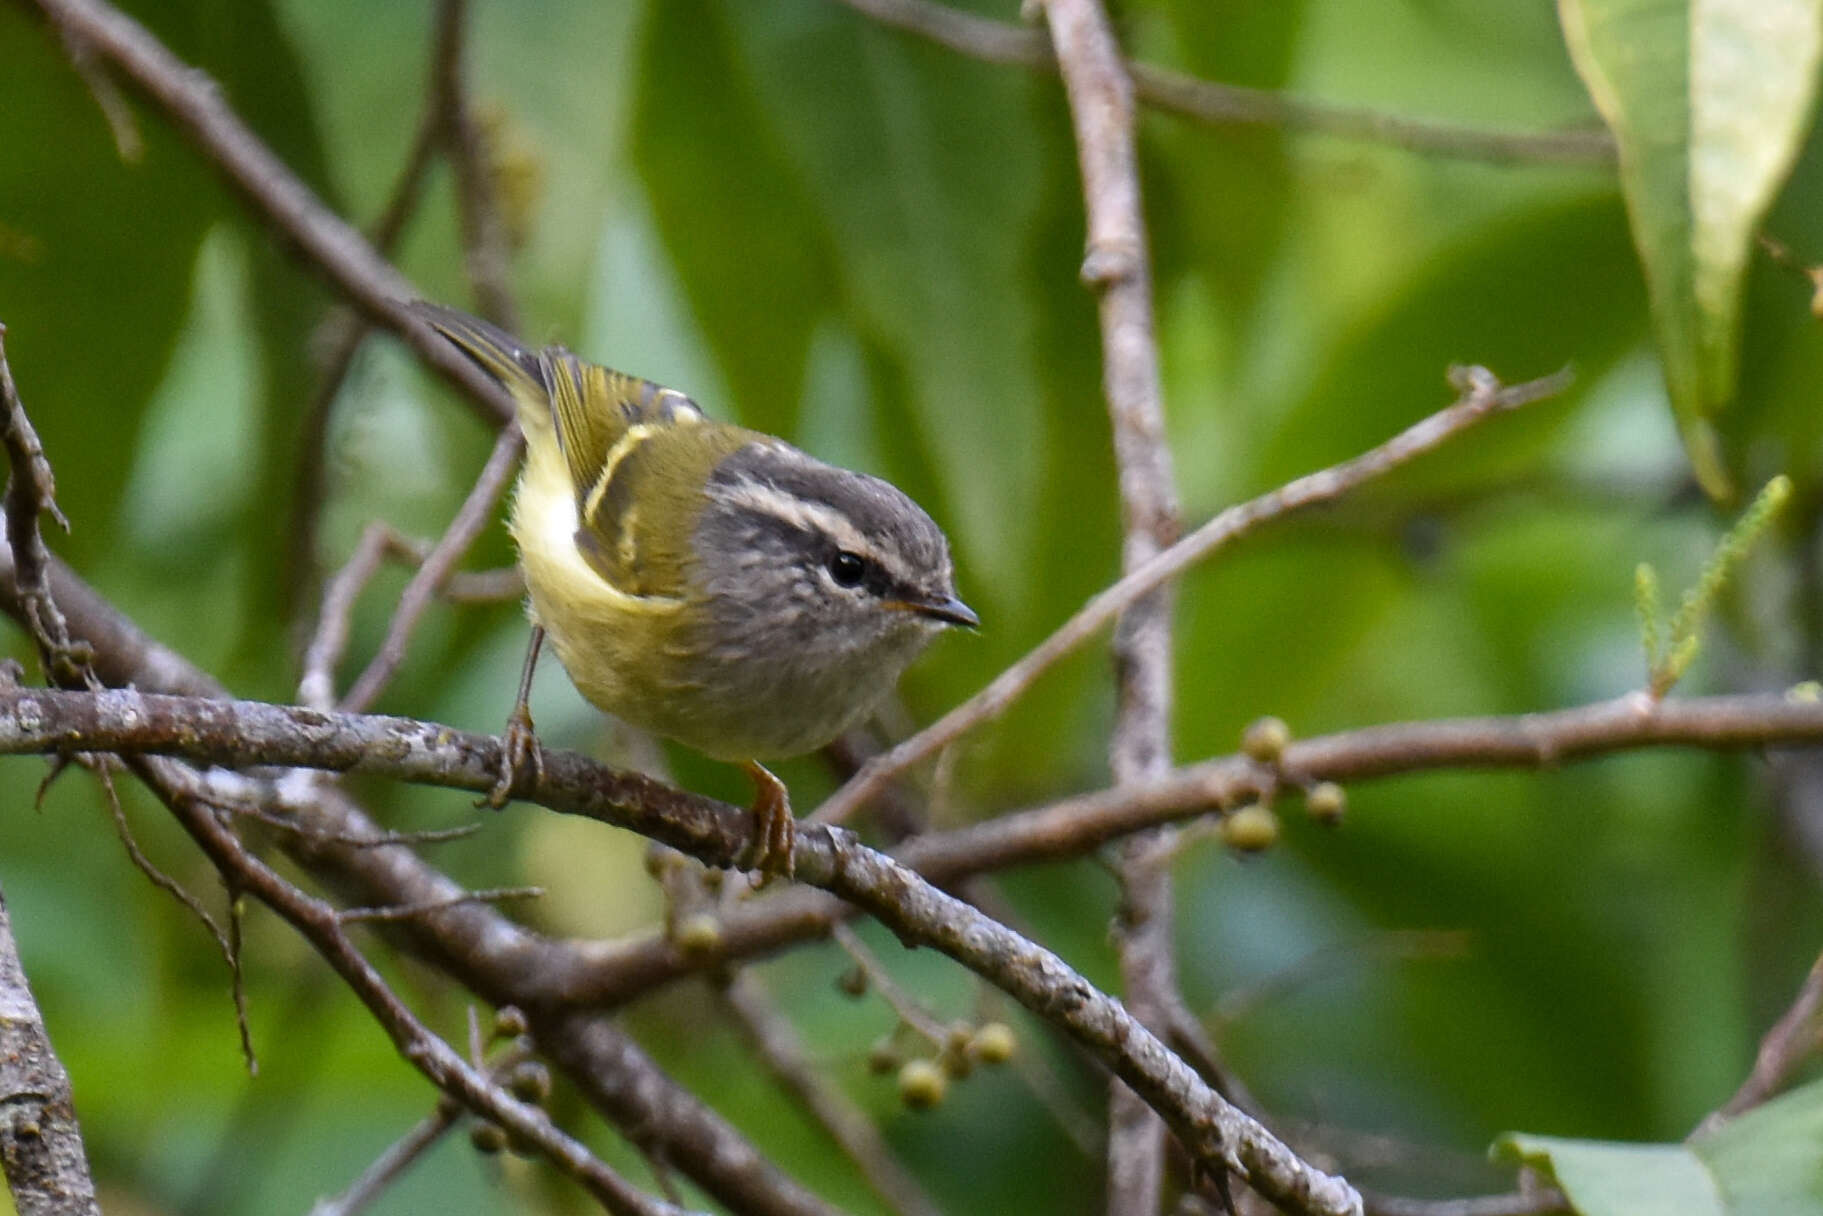 Image of Ashy-throated Warbler